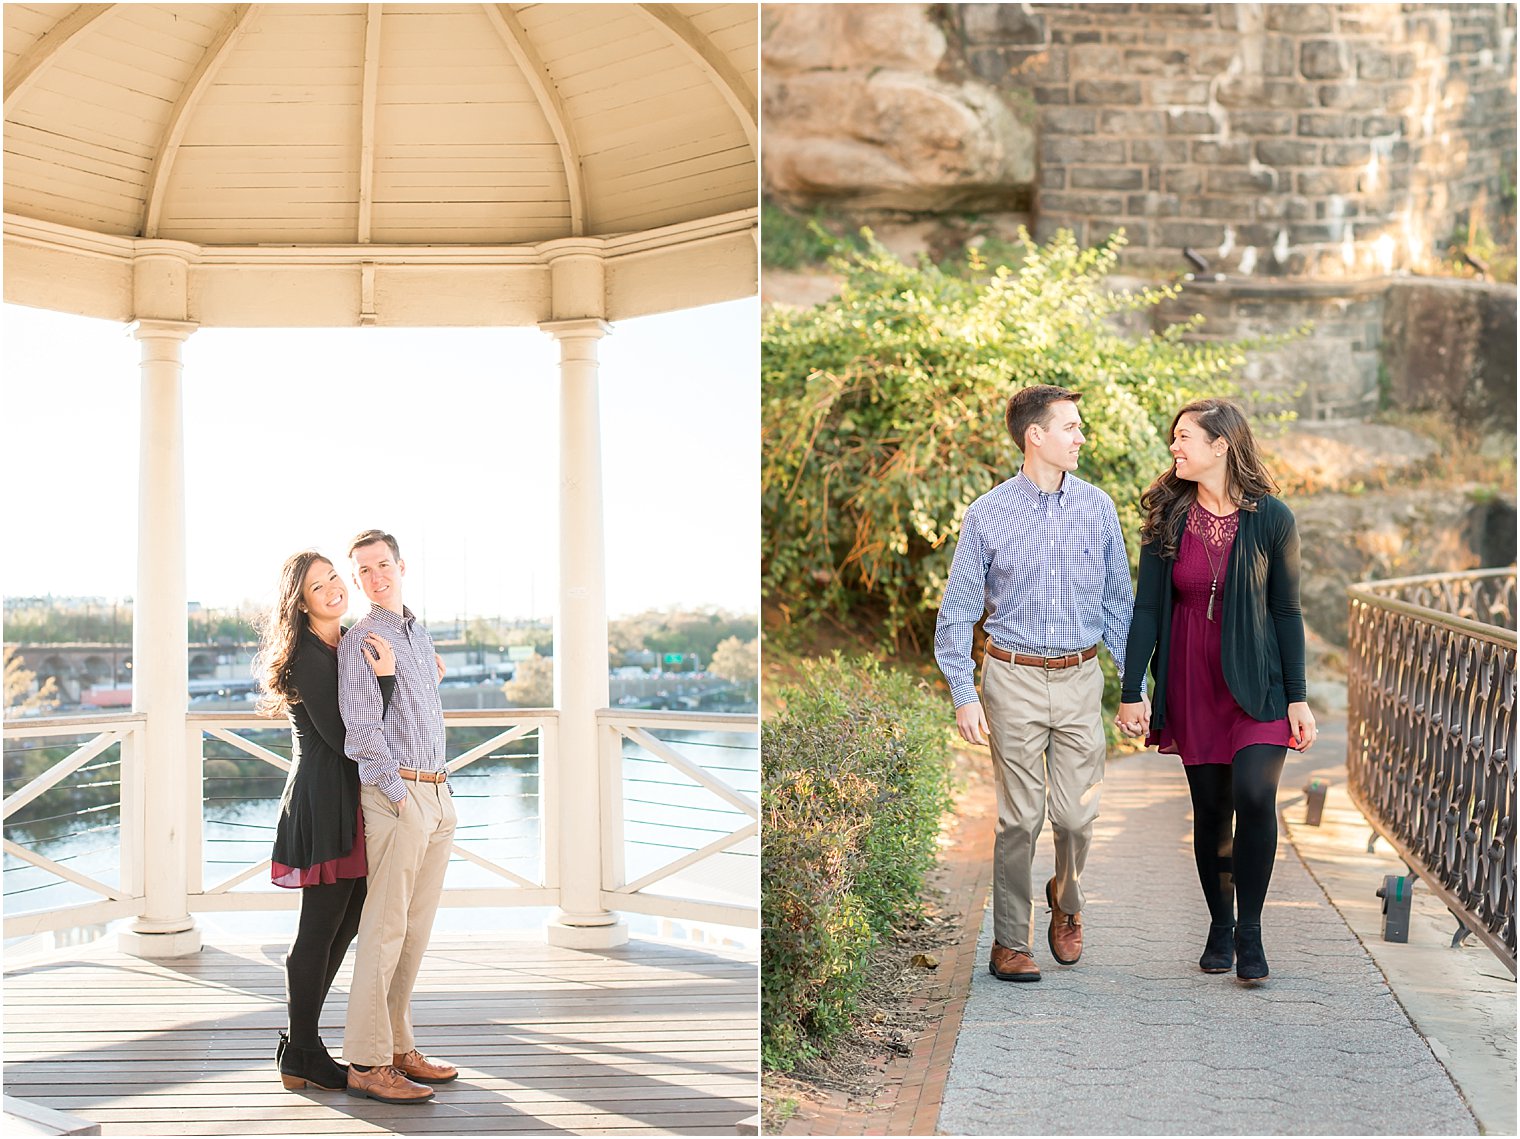 Waterworks engagement session